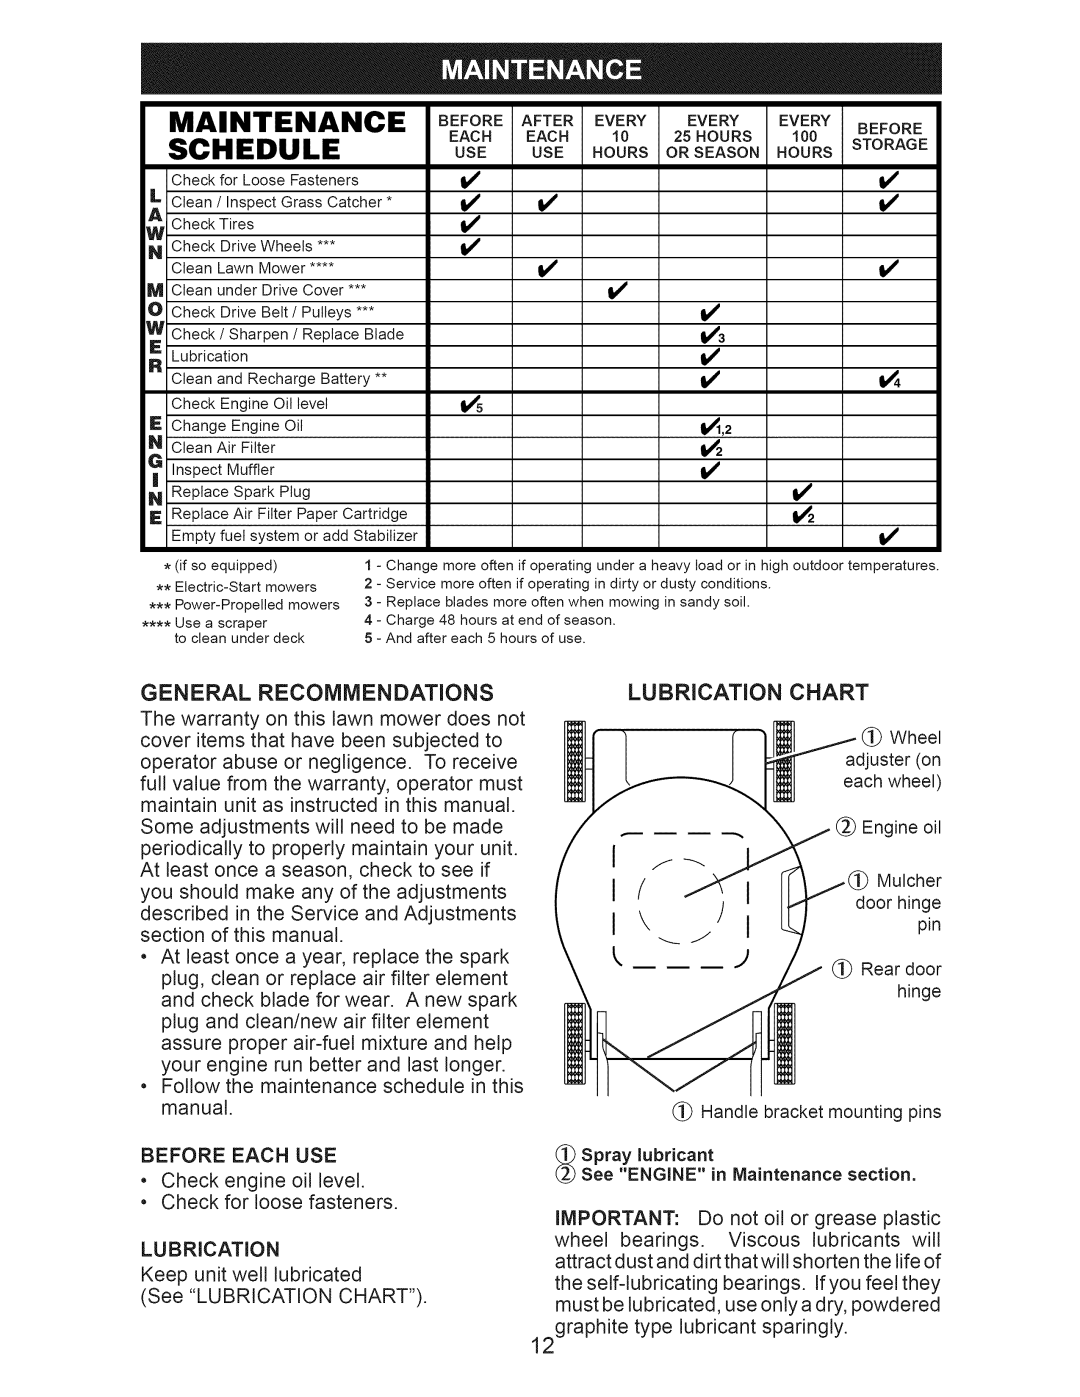 Craftsman 917.376231 owner manual Maintenance, Schedule, Use Hours 